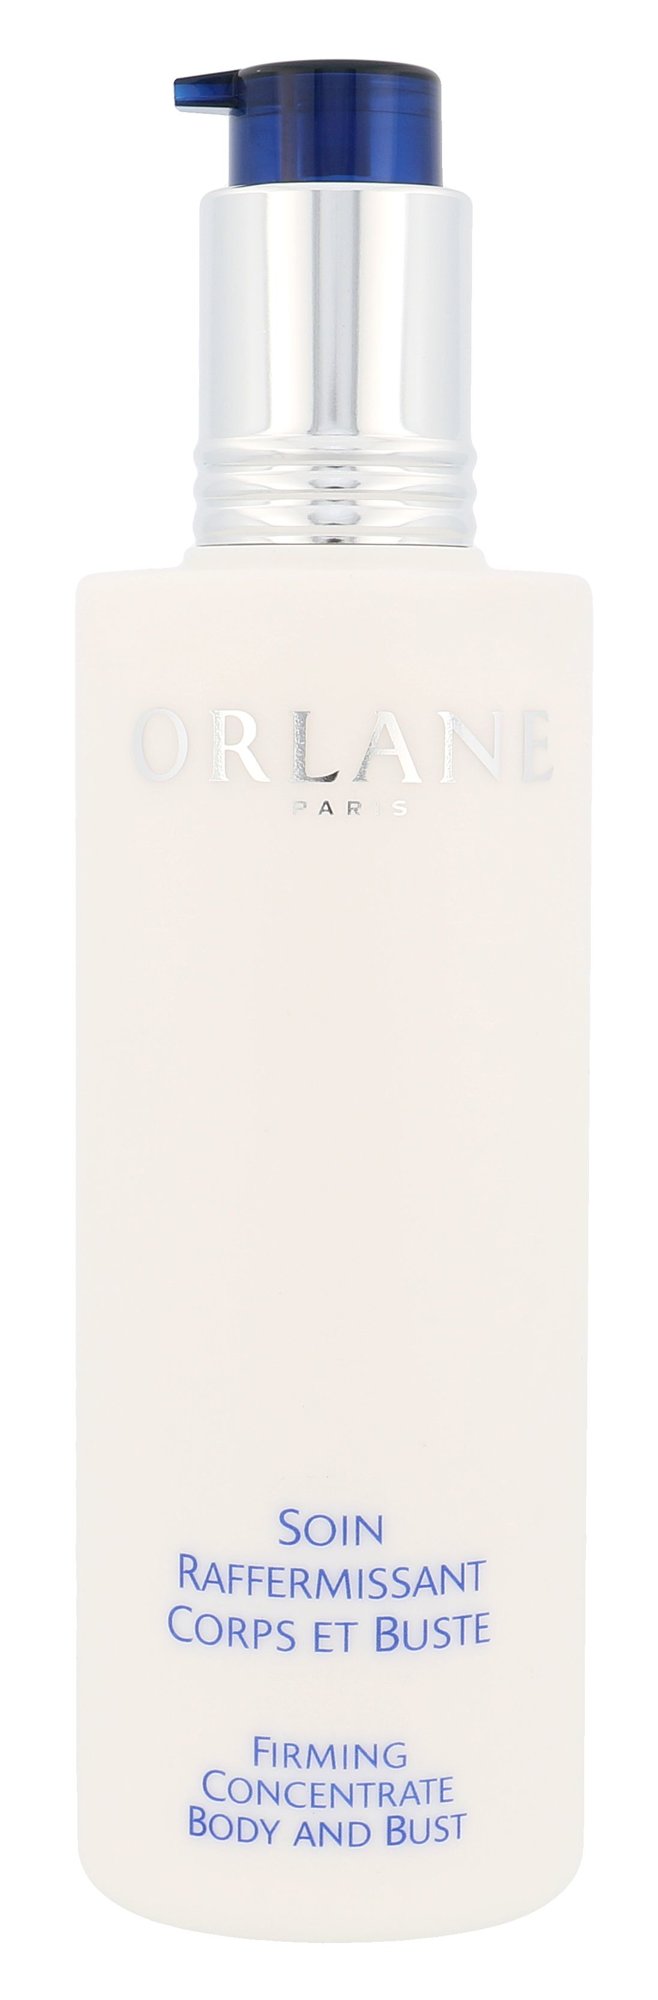 Orlane Firming Concentrate Body And Bust